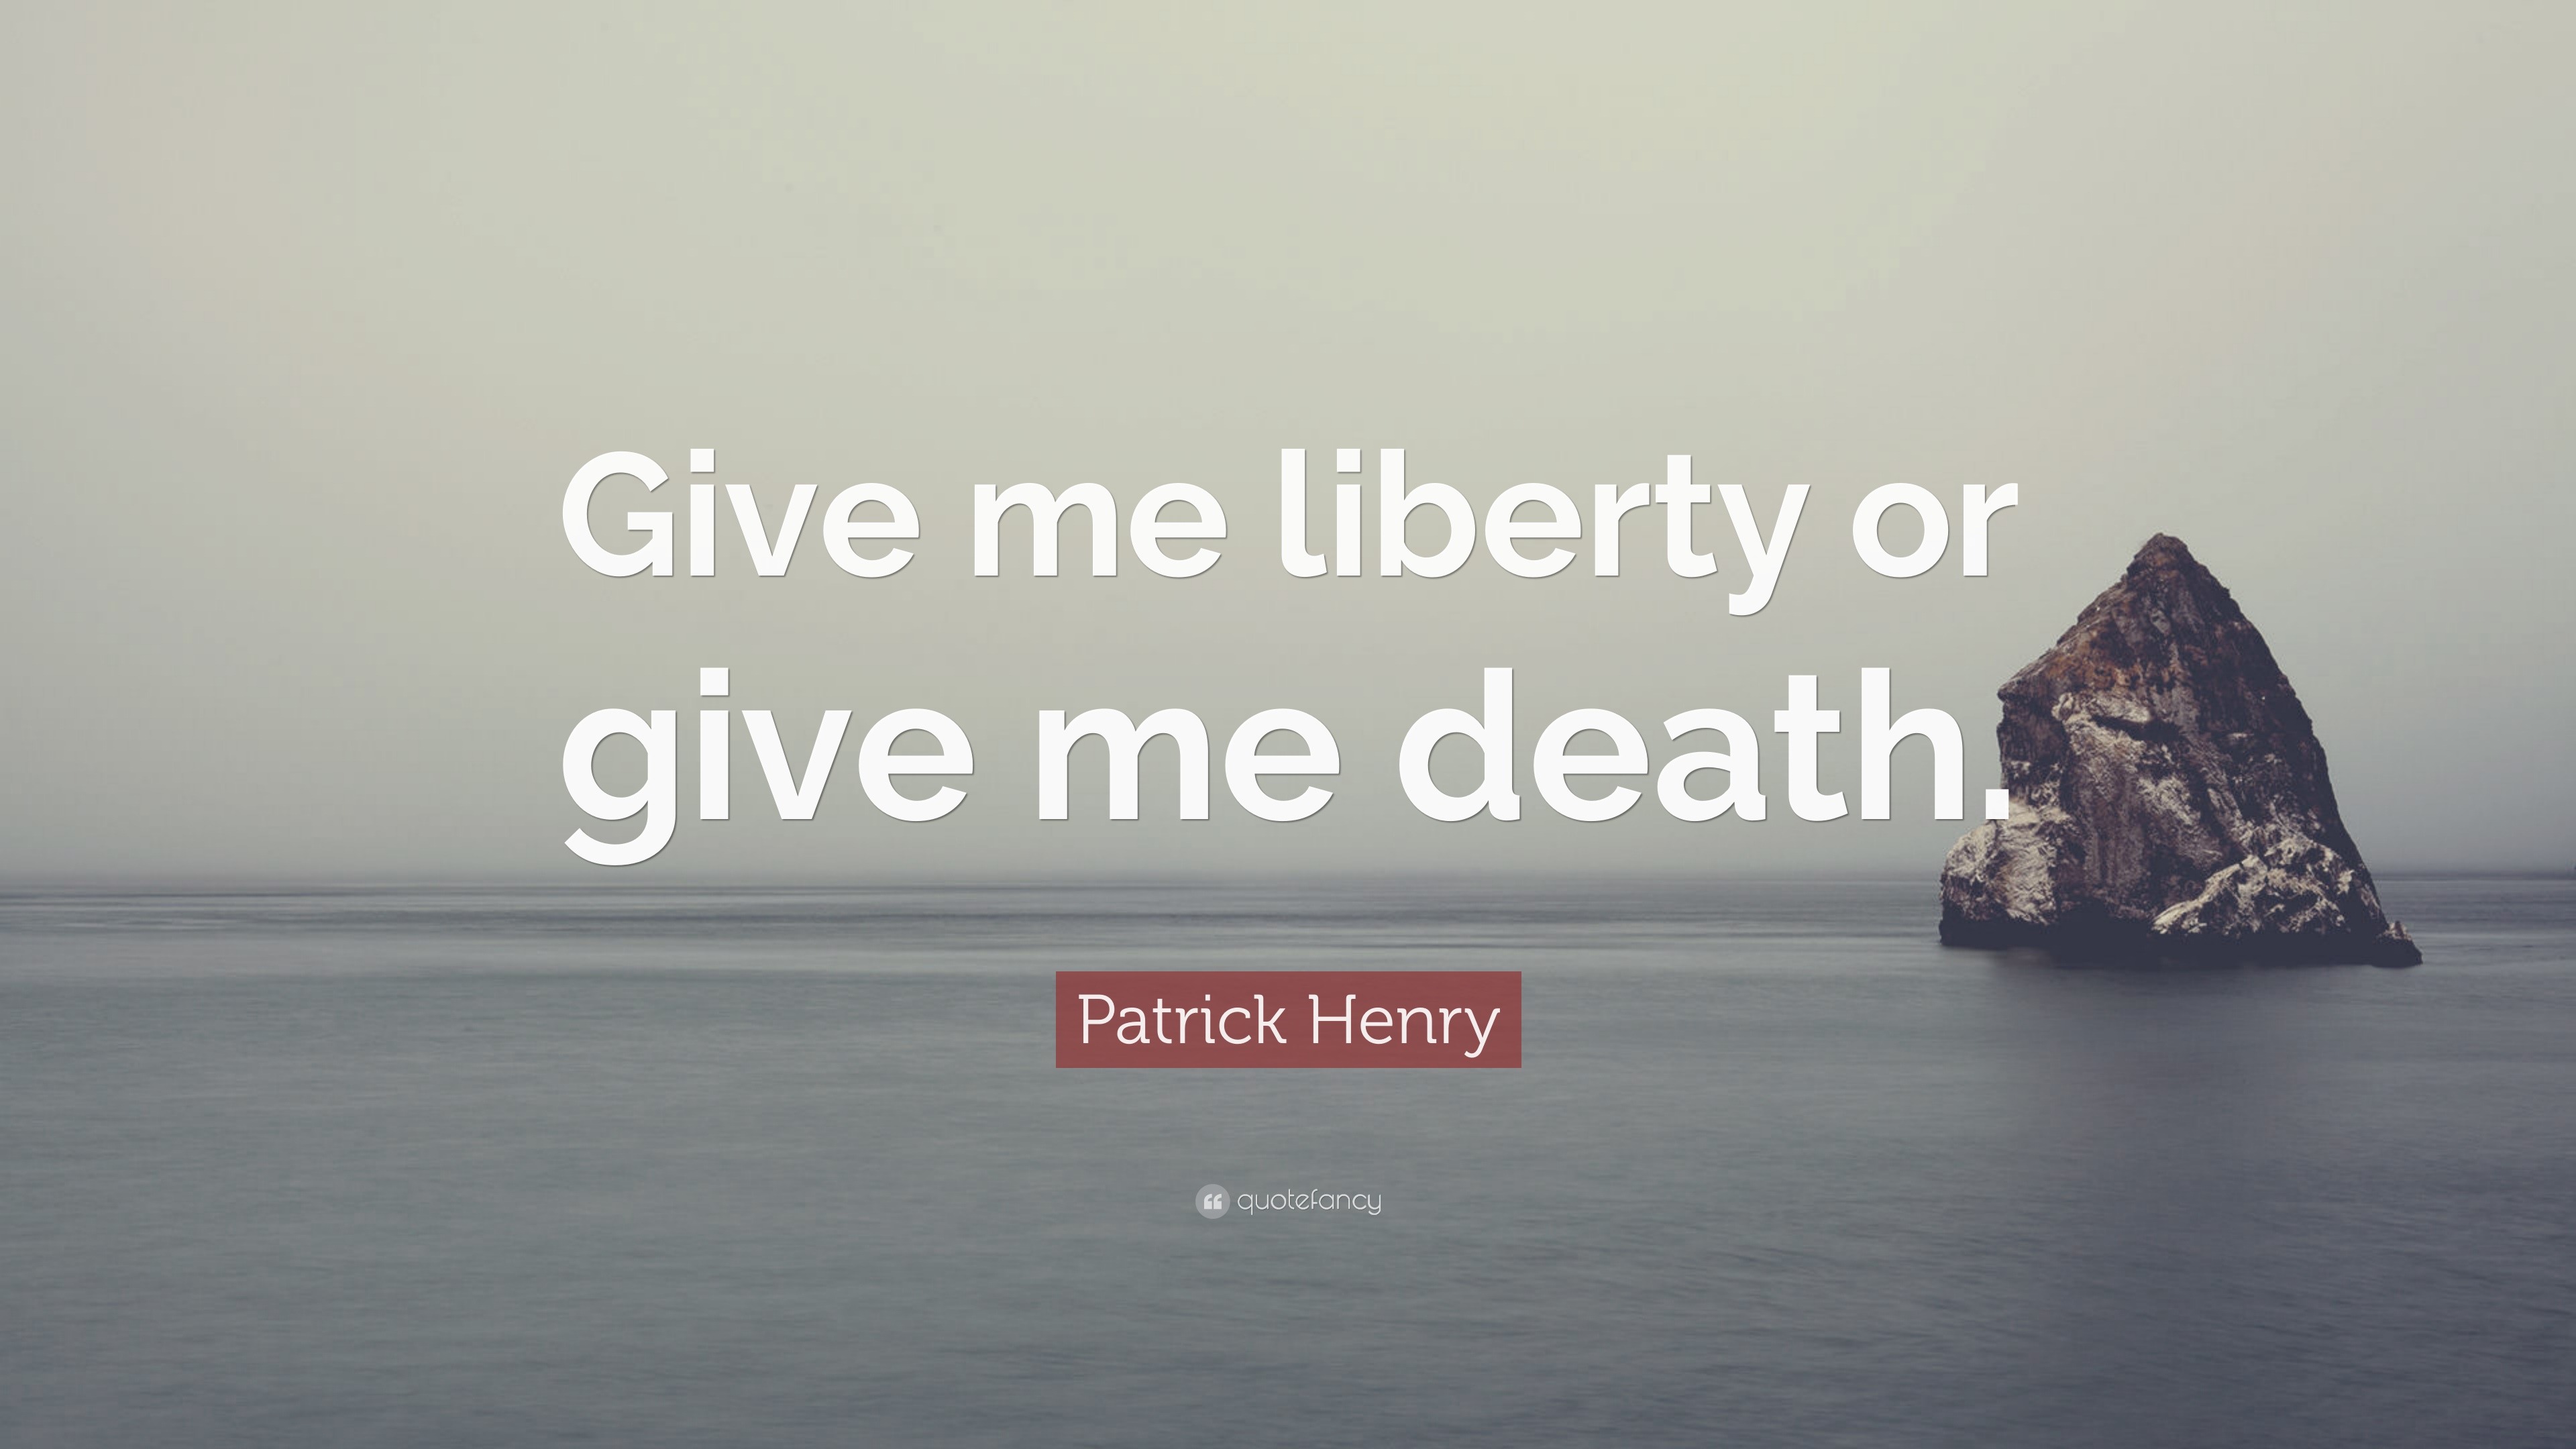 Patrick Henry Quote: “Give me liberty or give me death.”